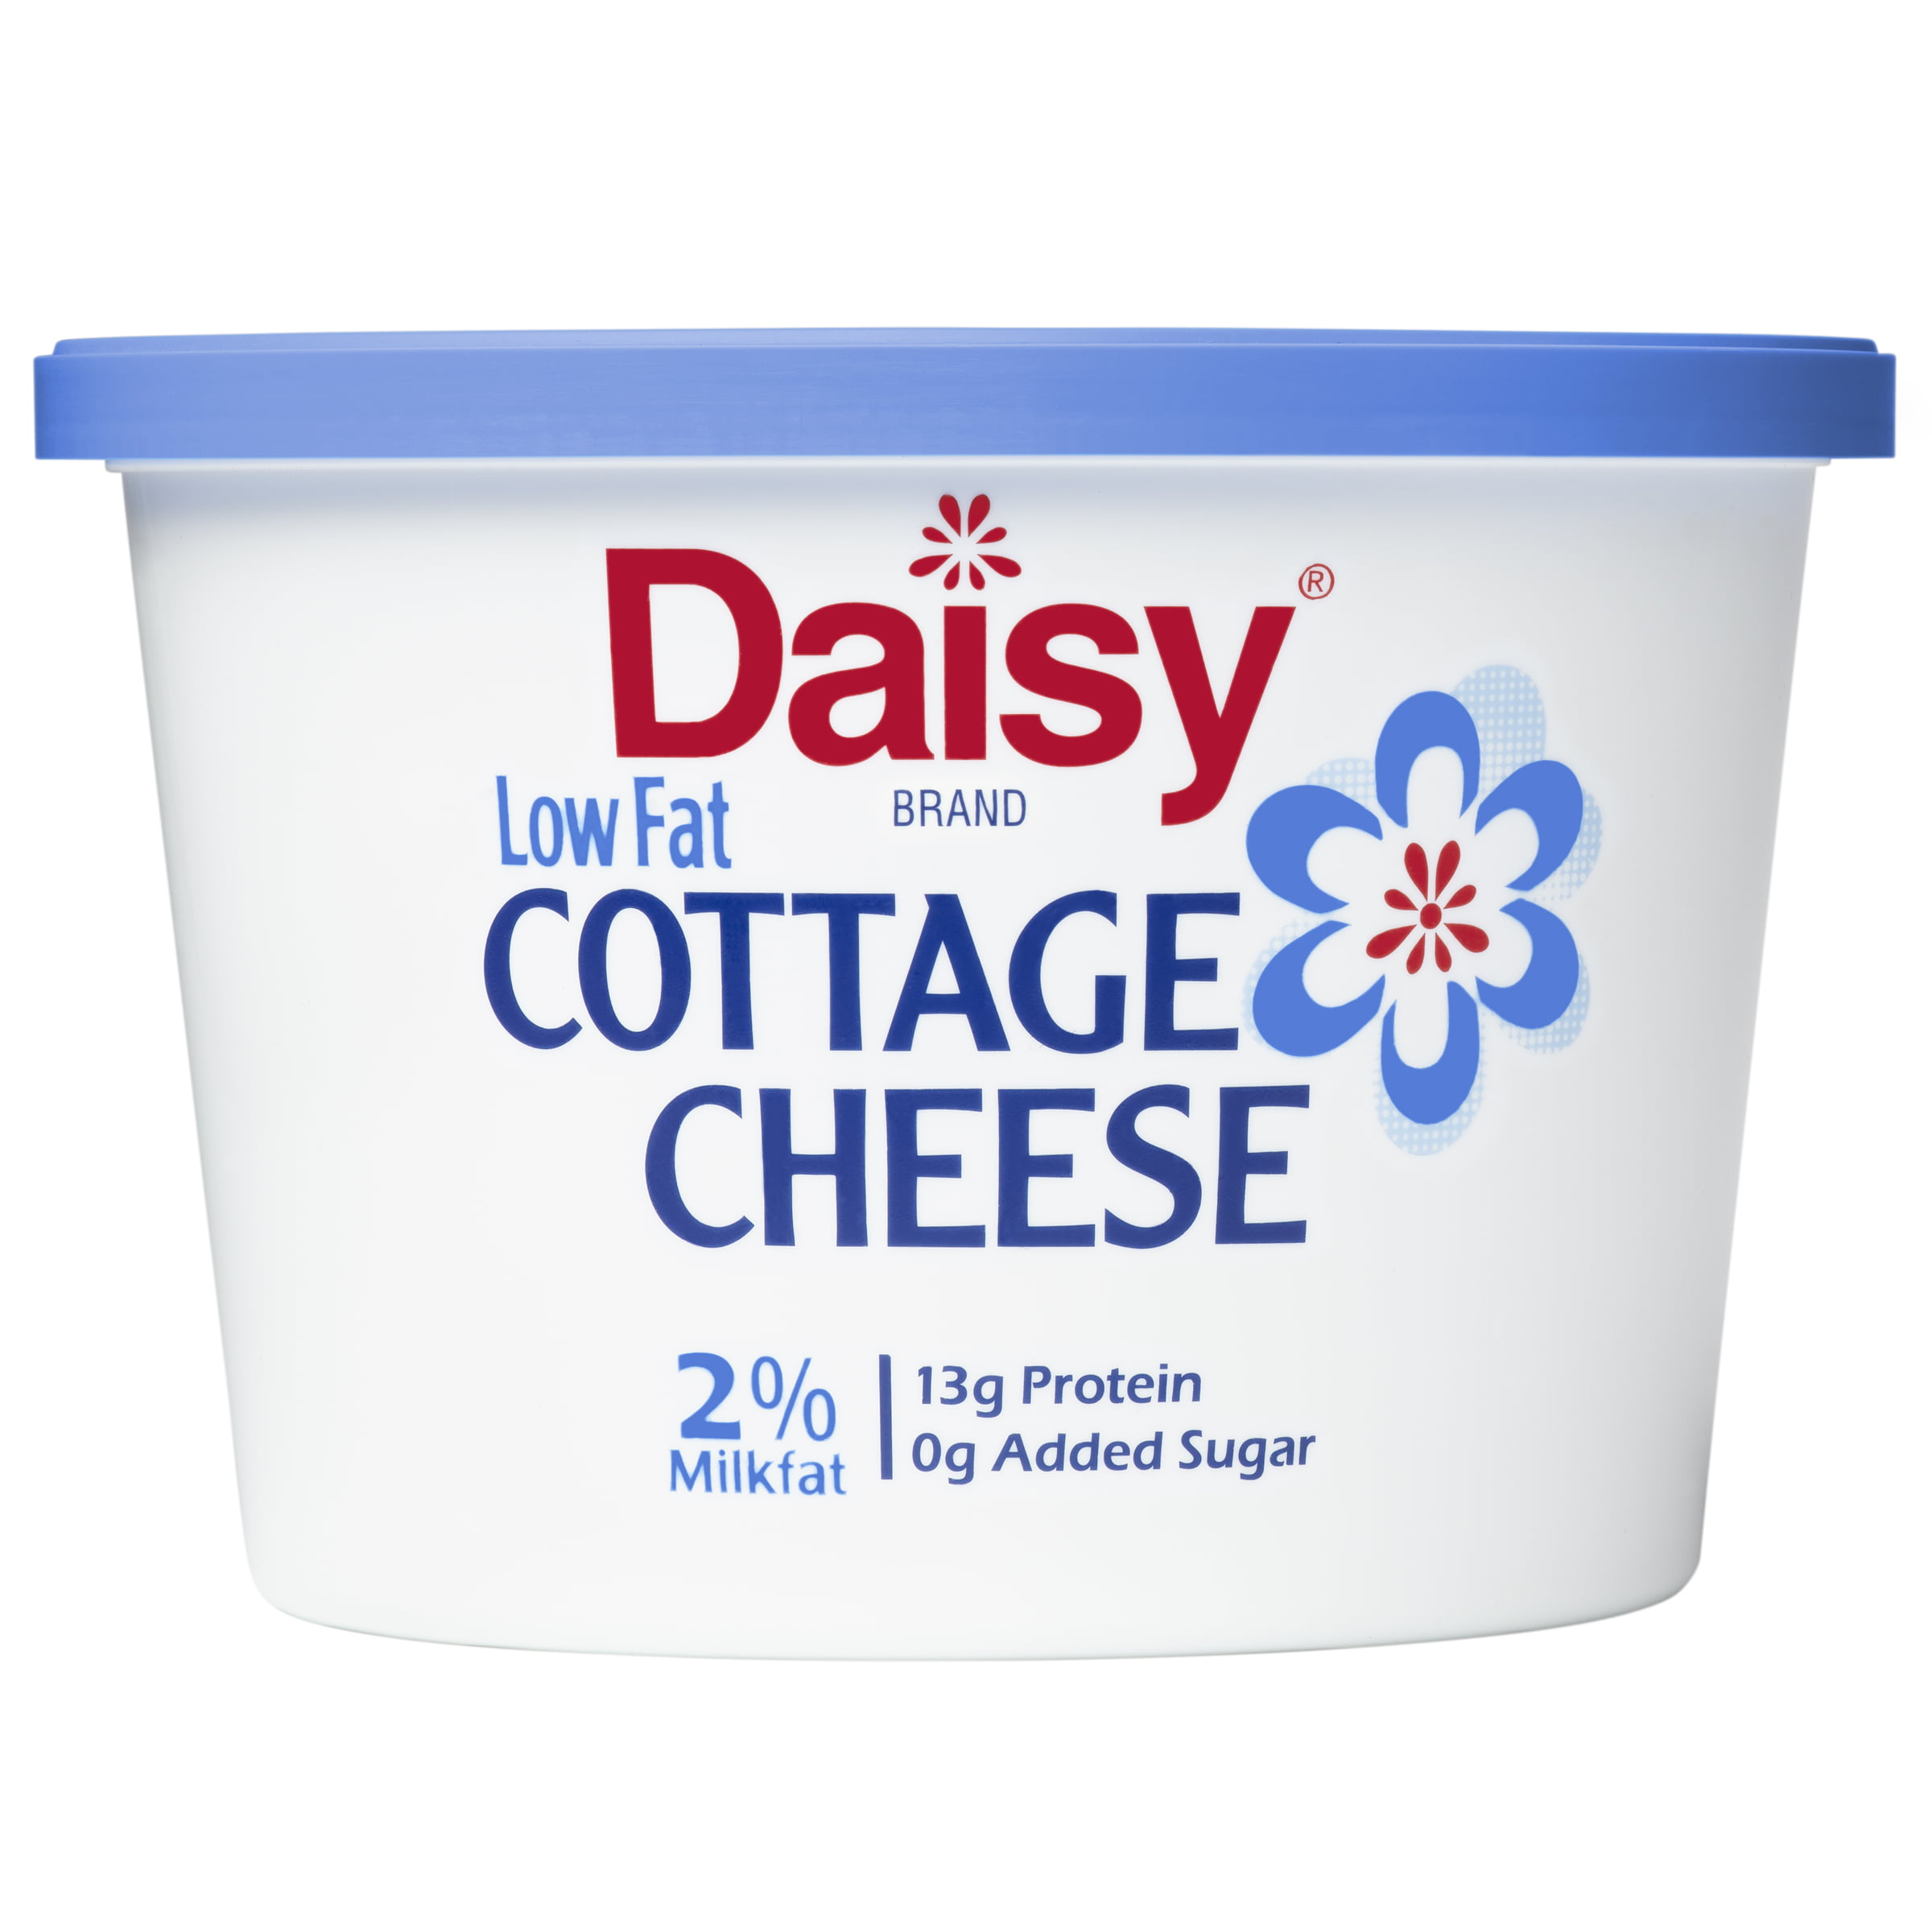 Daisy Low Fat Cottage Cheese Small Curd 2 Milk Fat 16 Oz